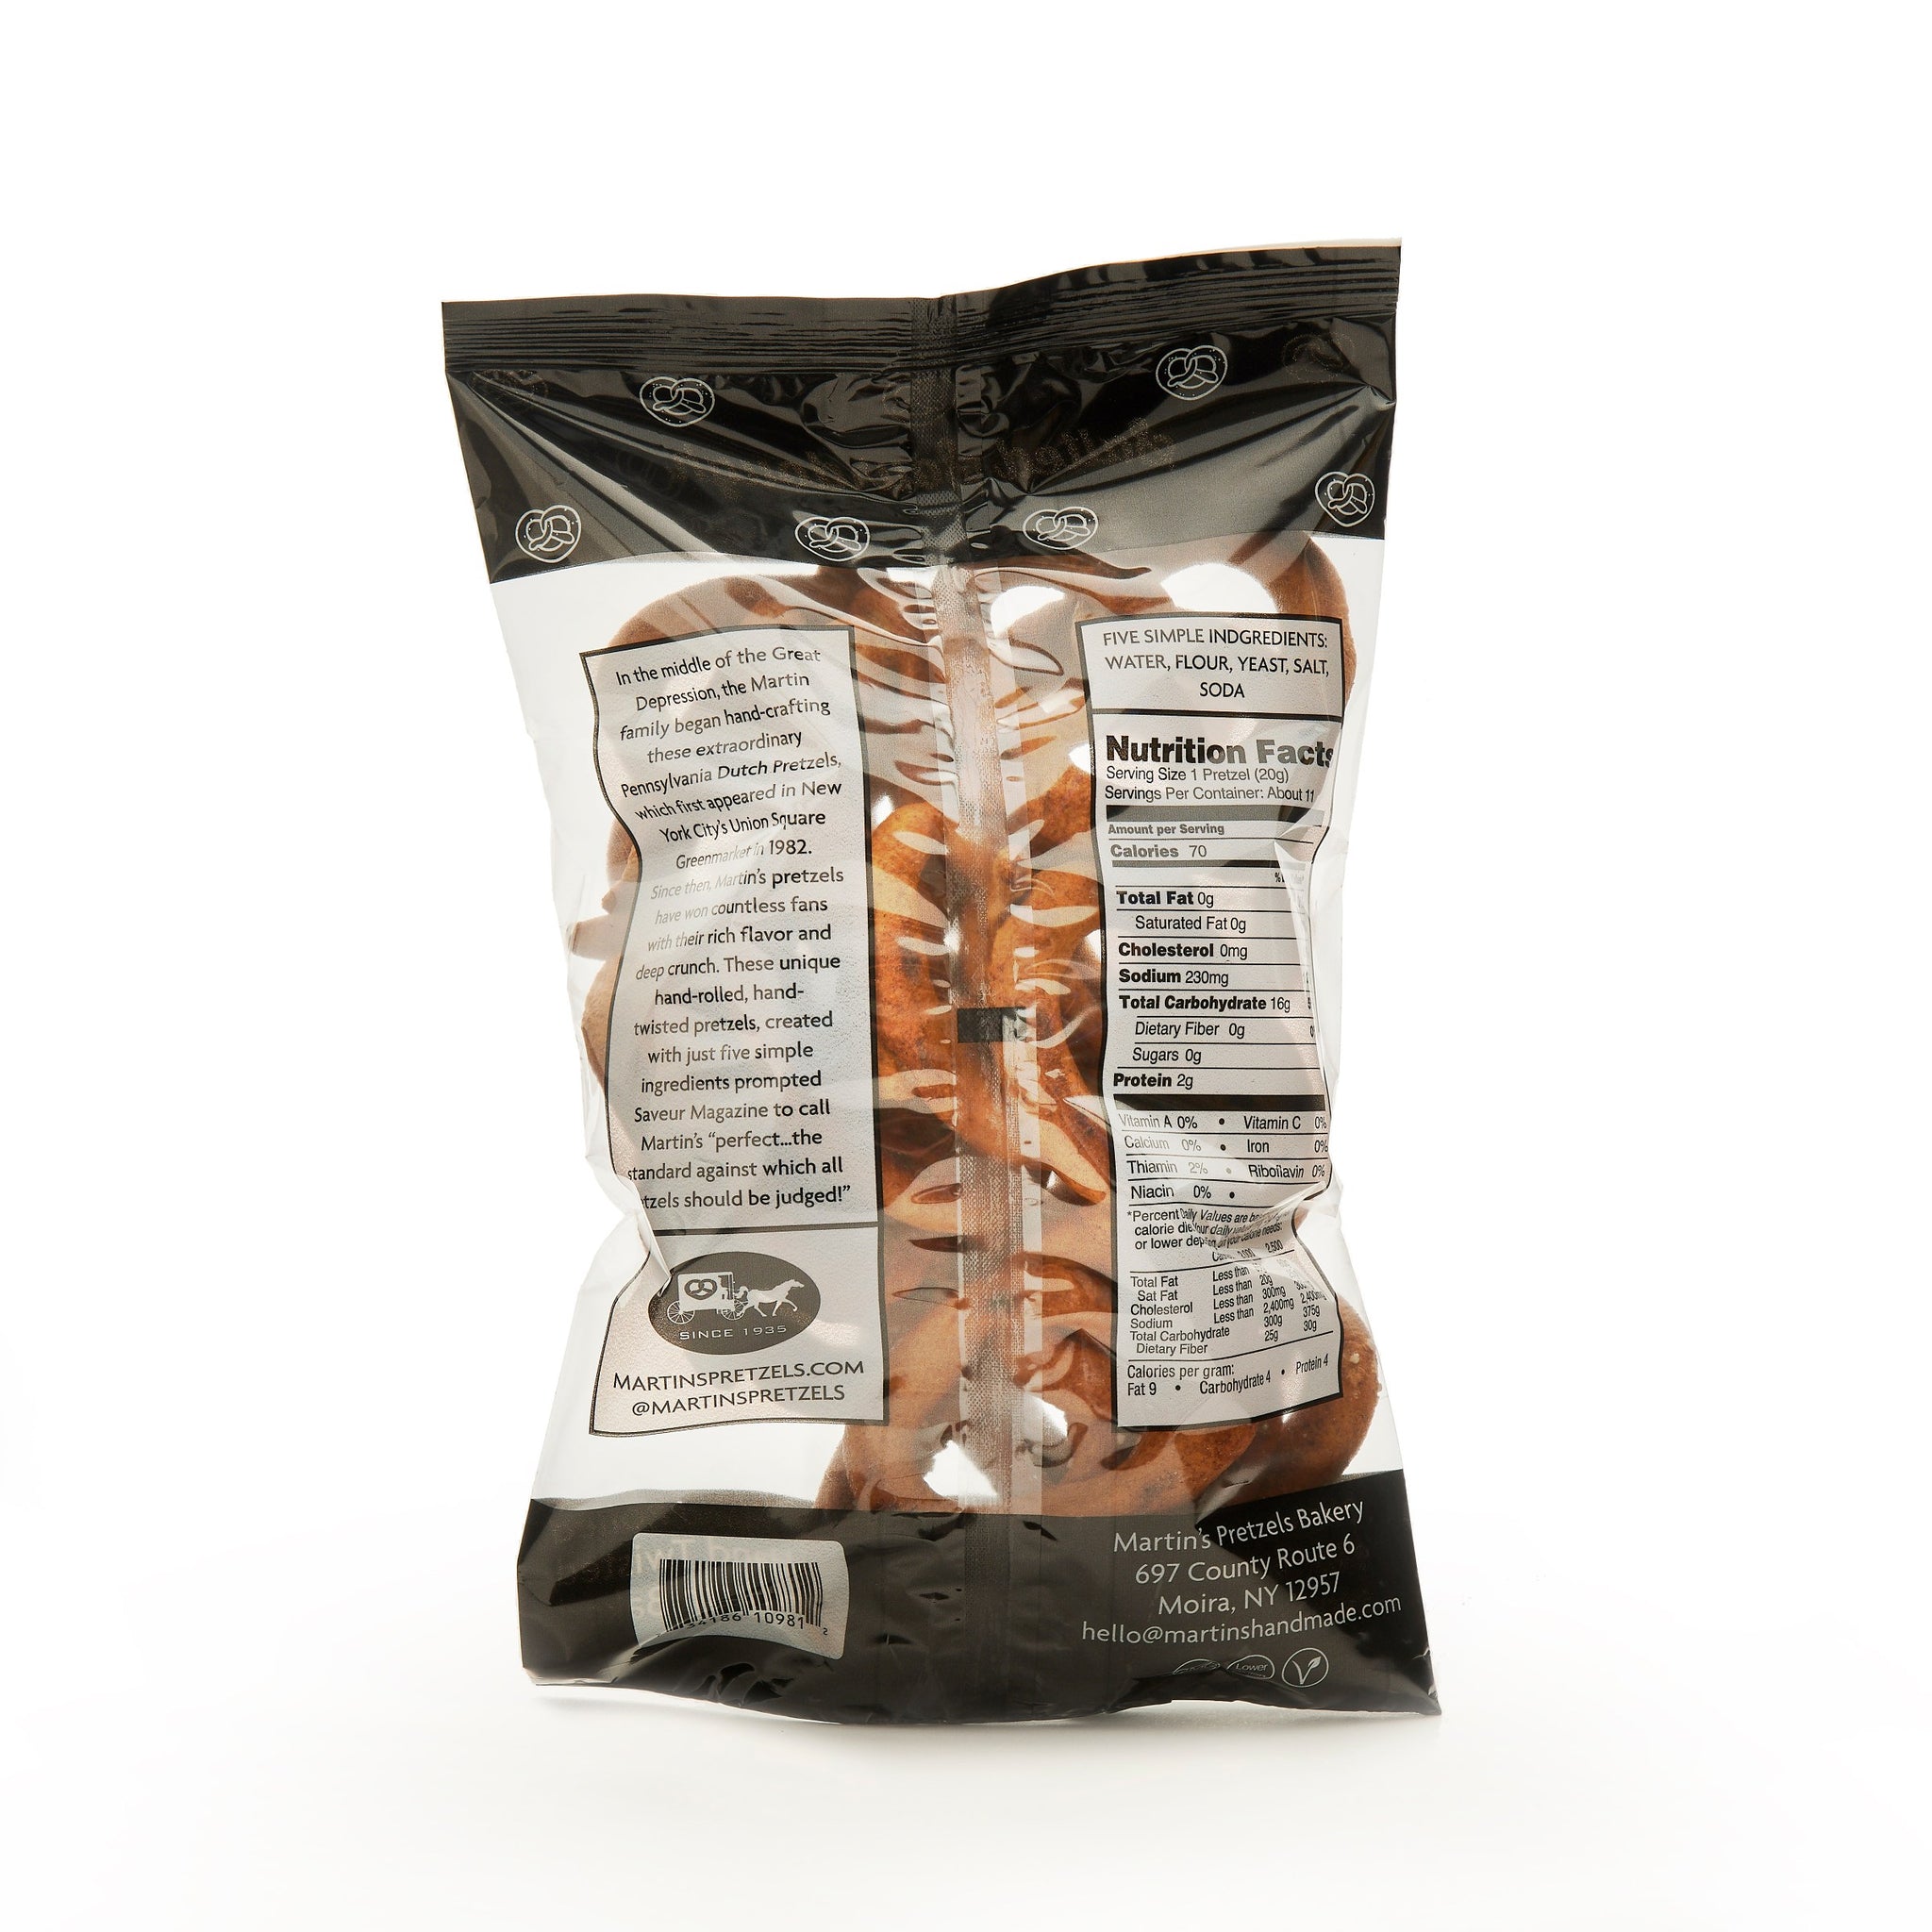 Our whole wheat pretzel is made with 100% whole wheat flour. – Martin's ...